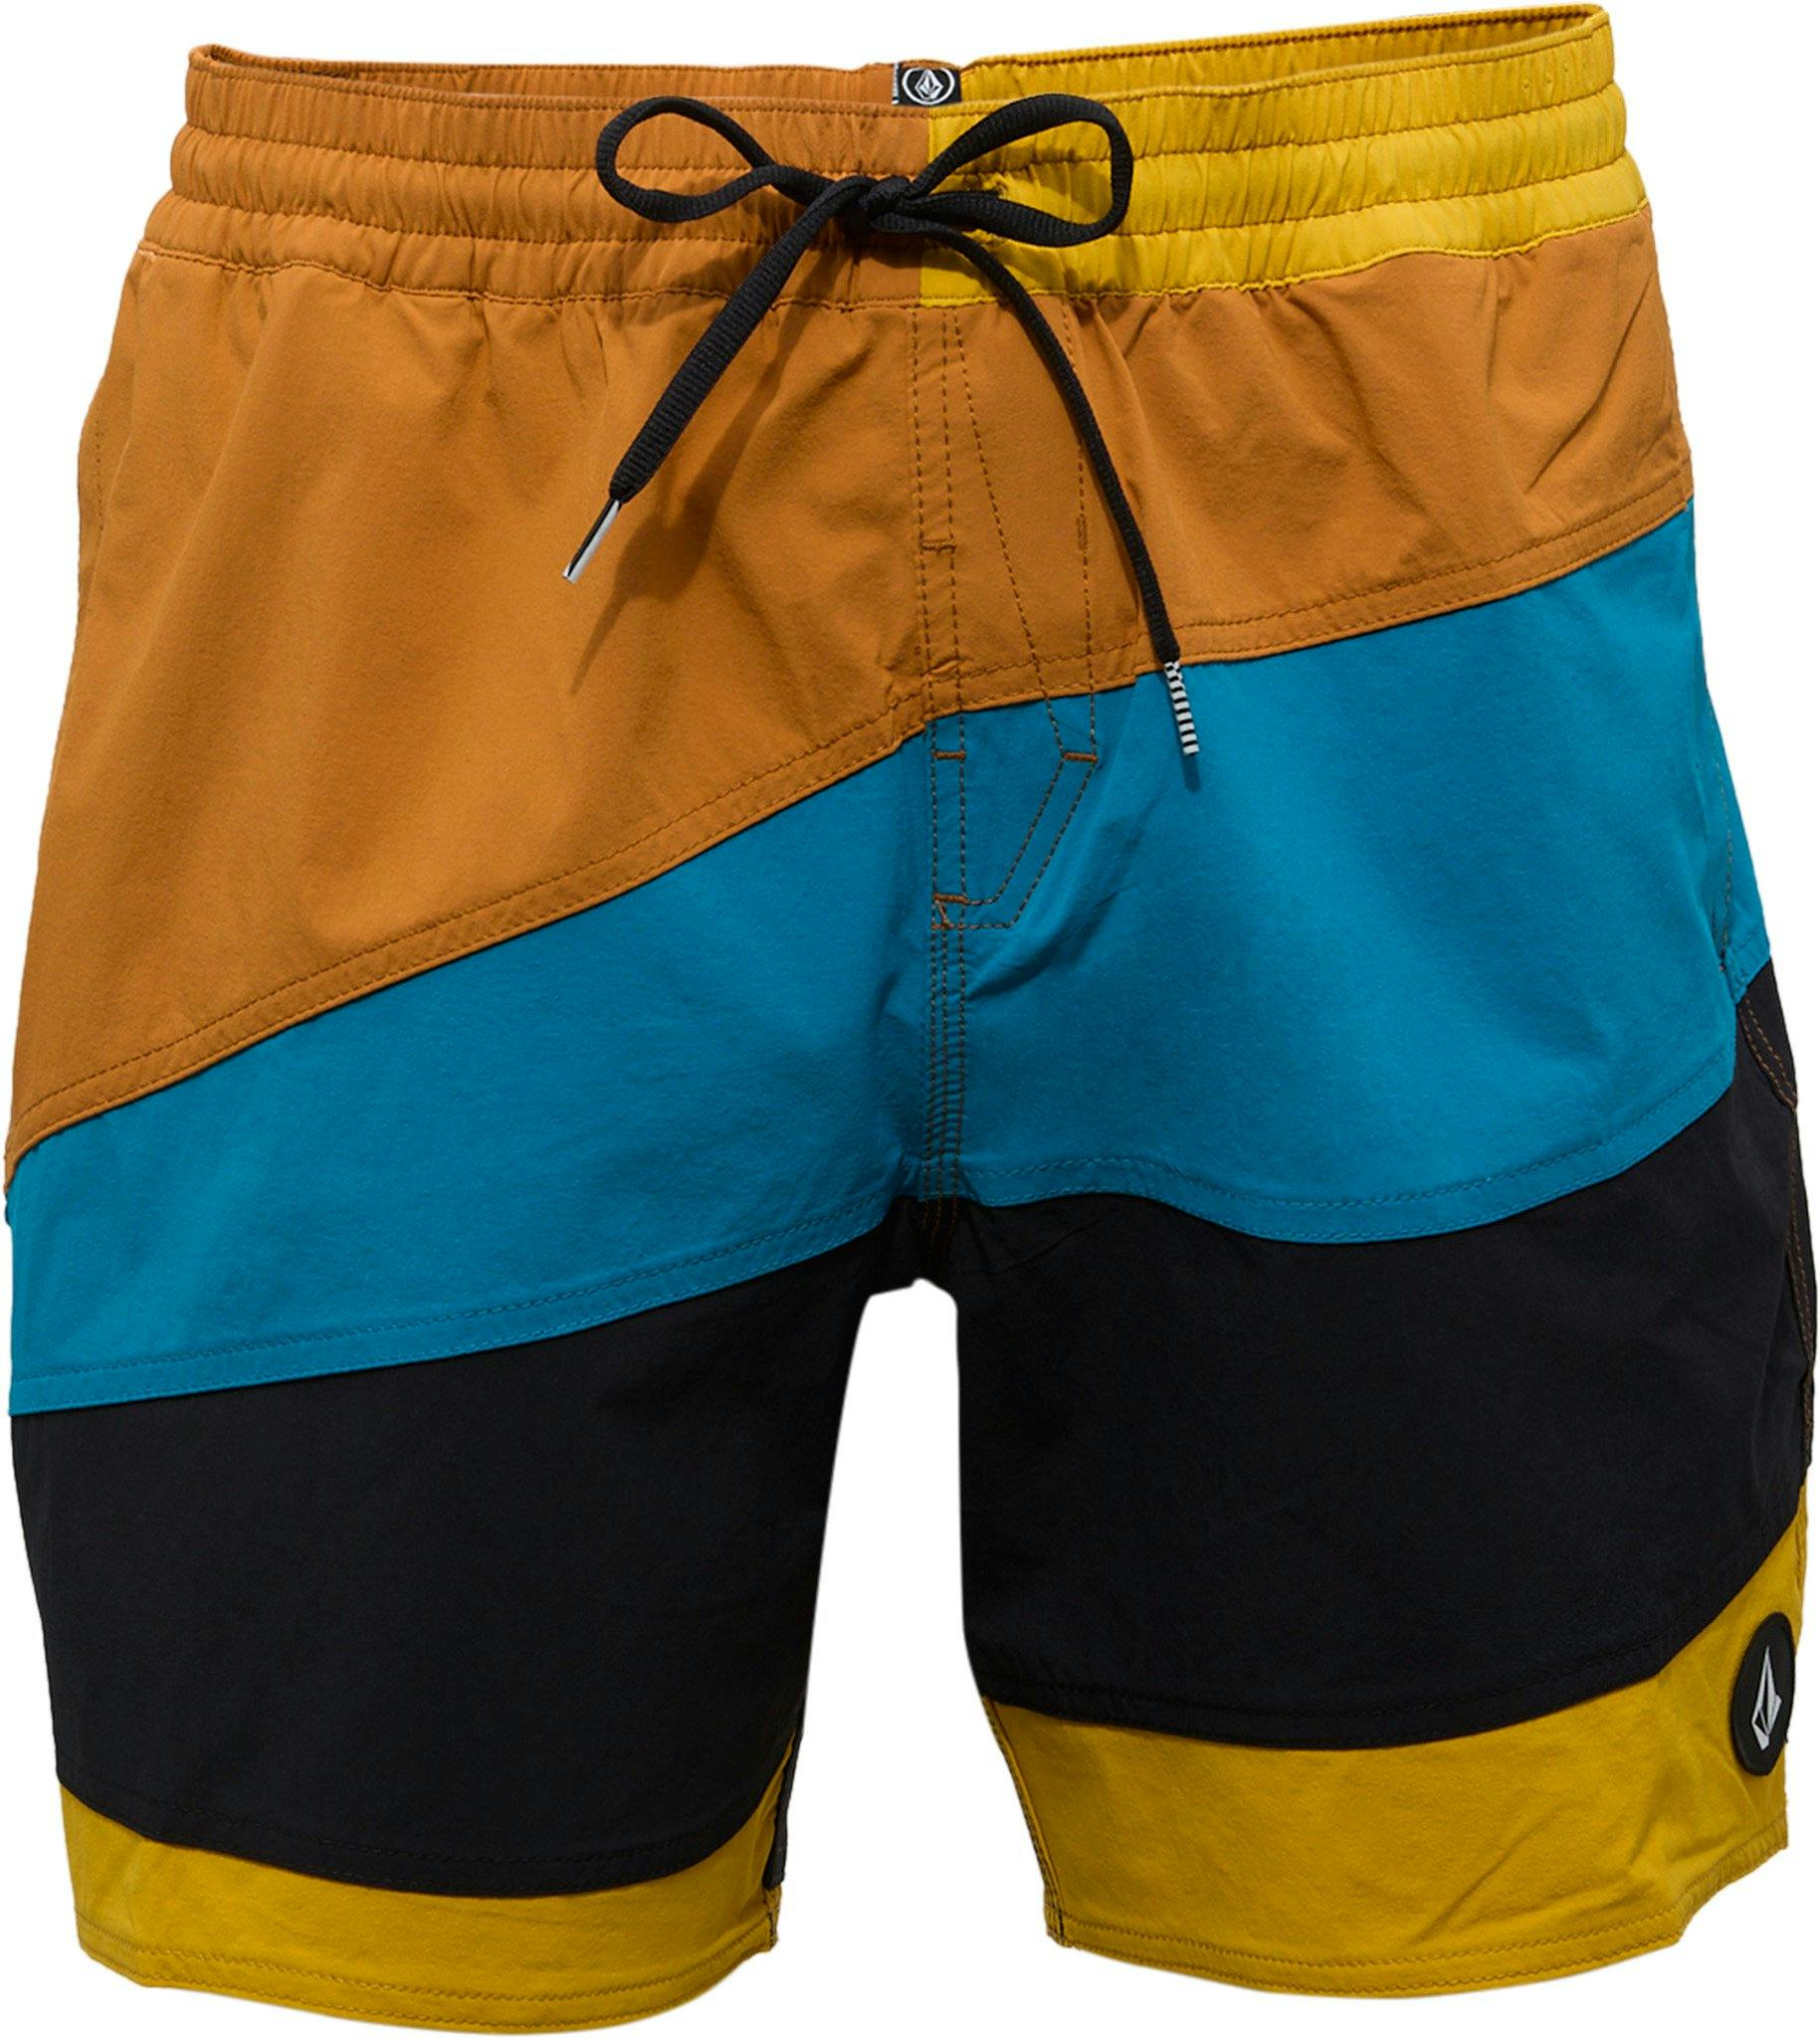 Product image for Marine Time Trunks 17" - Men's